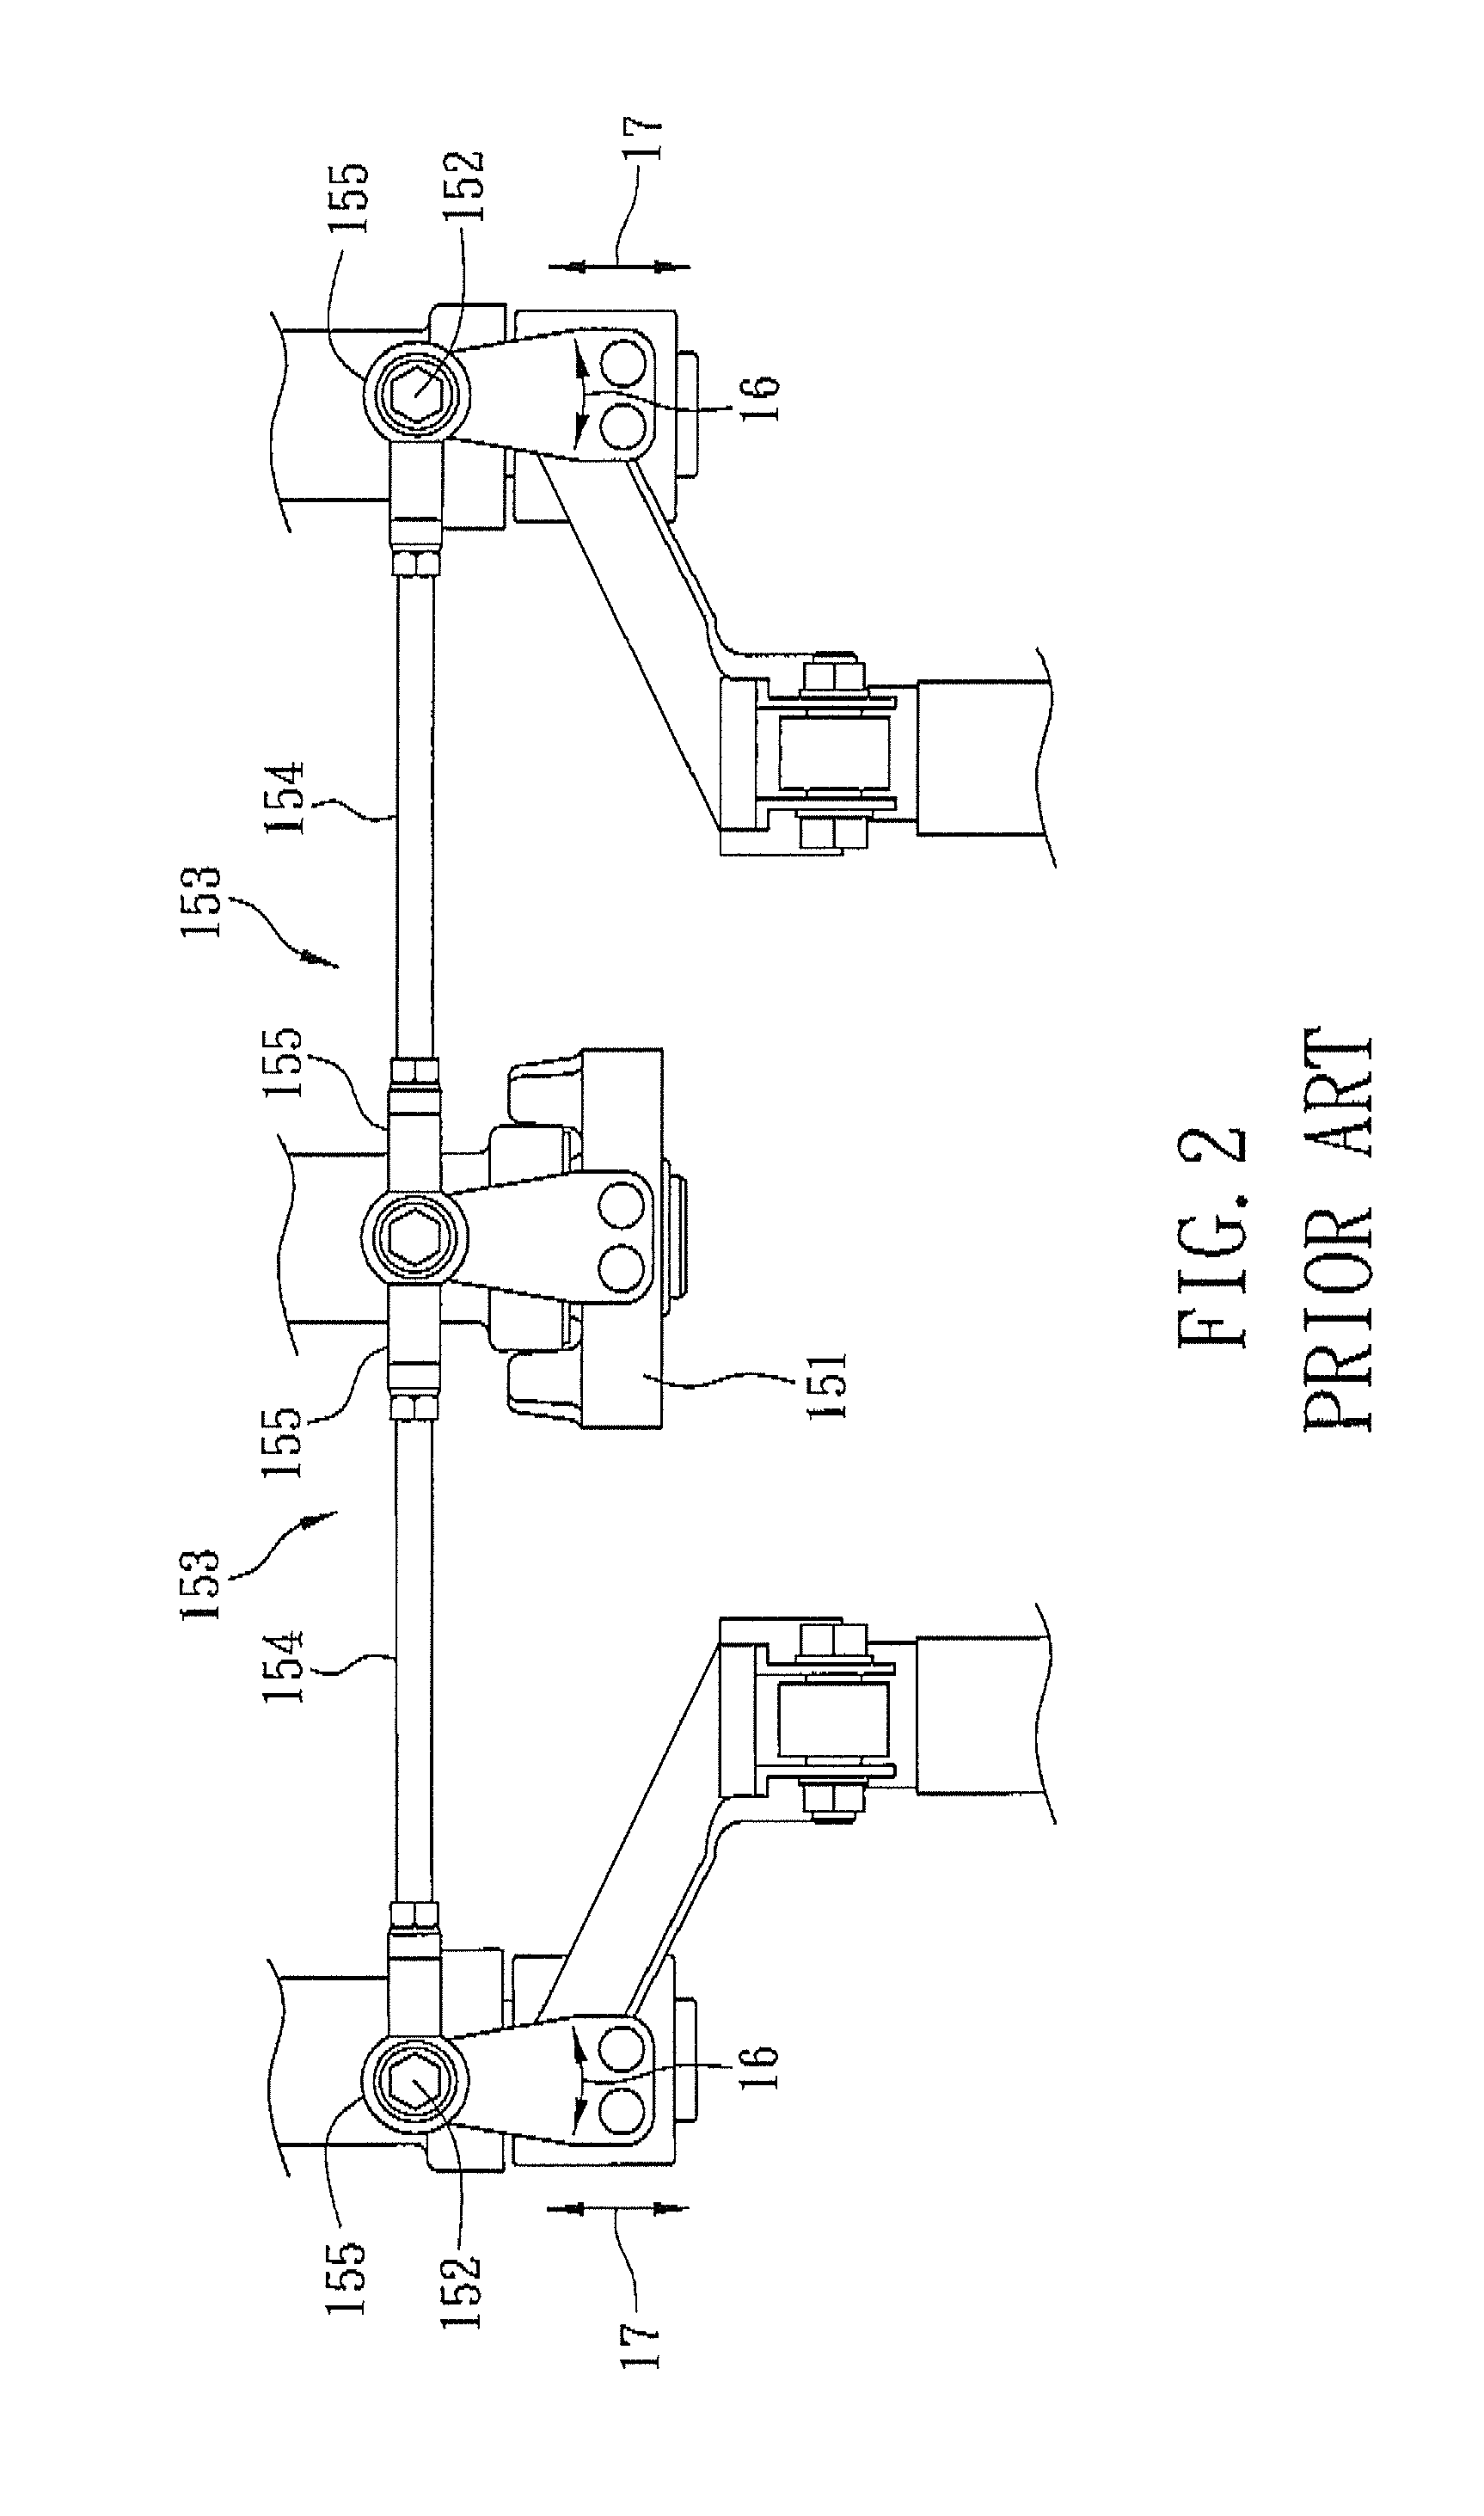 Steering apparatus for a vehicle having two front wheels